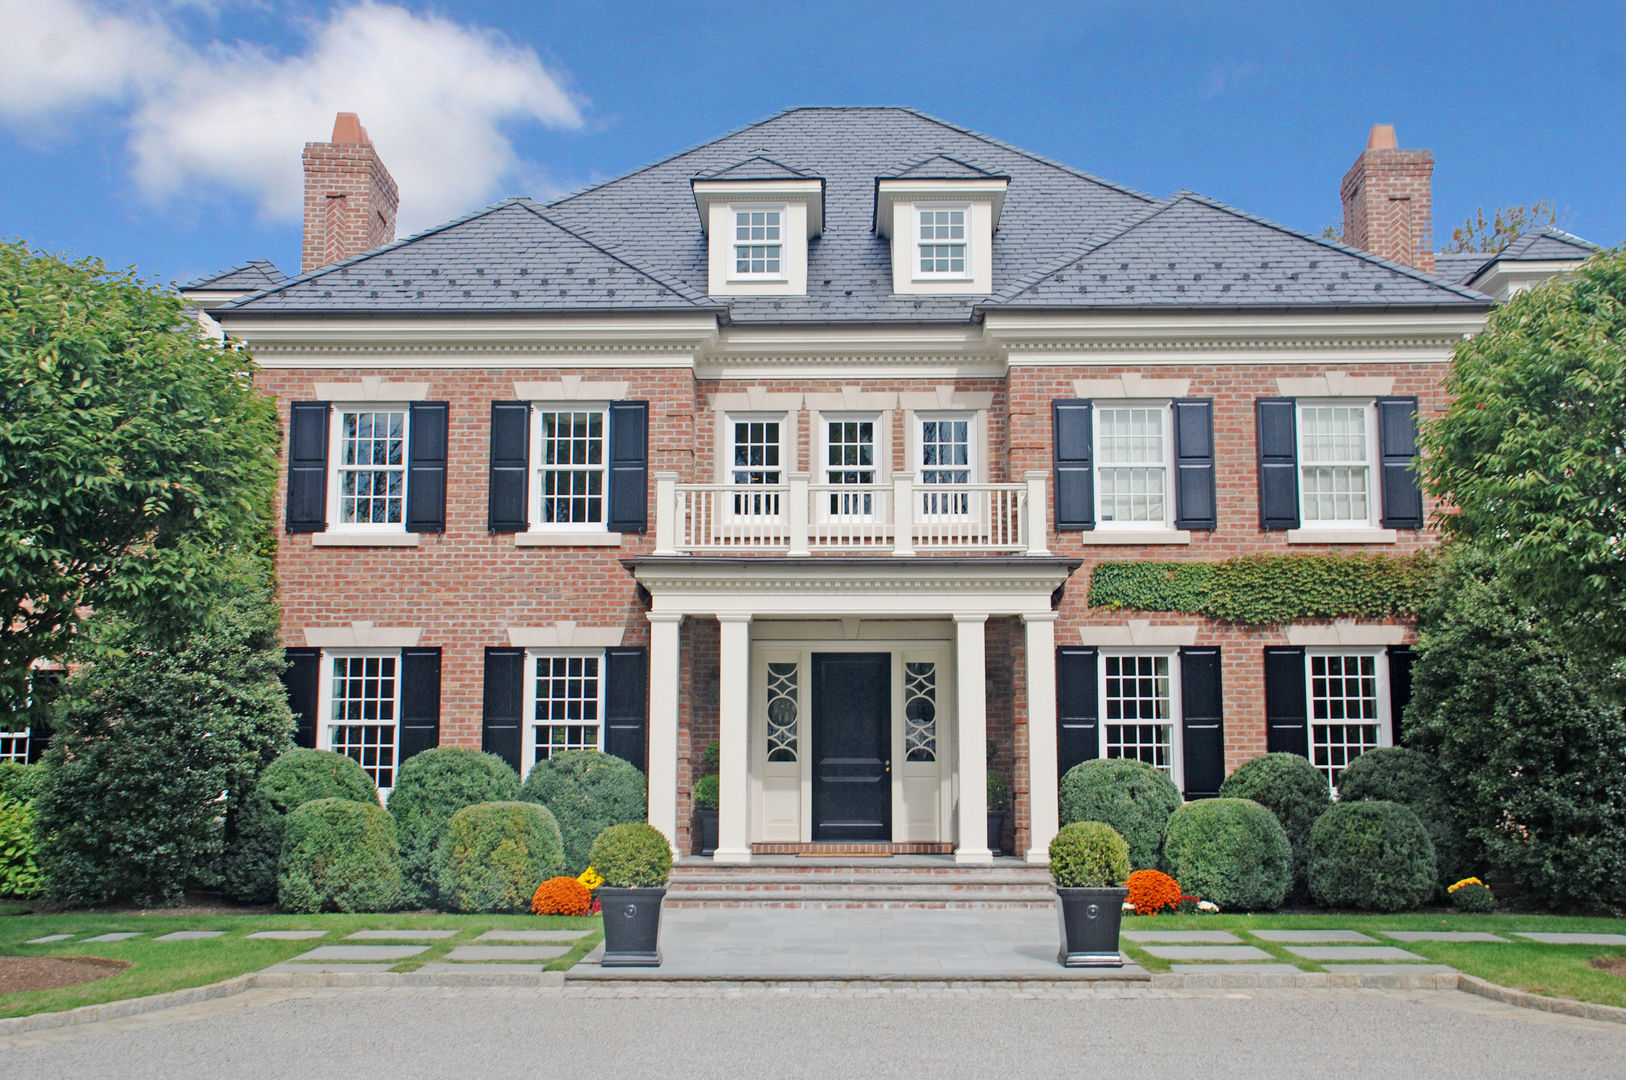 Georgian Colonial, Greenwich, CT by DeMotte Architects DeMotte Architects, P.C. 房子